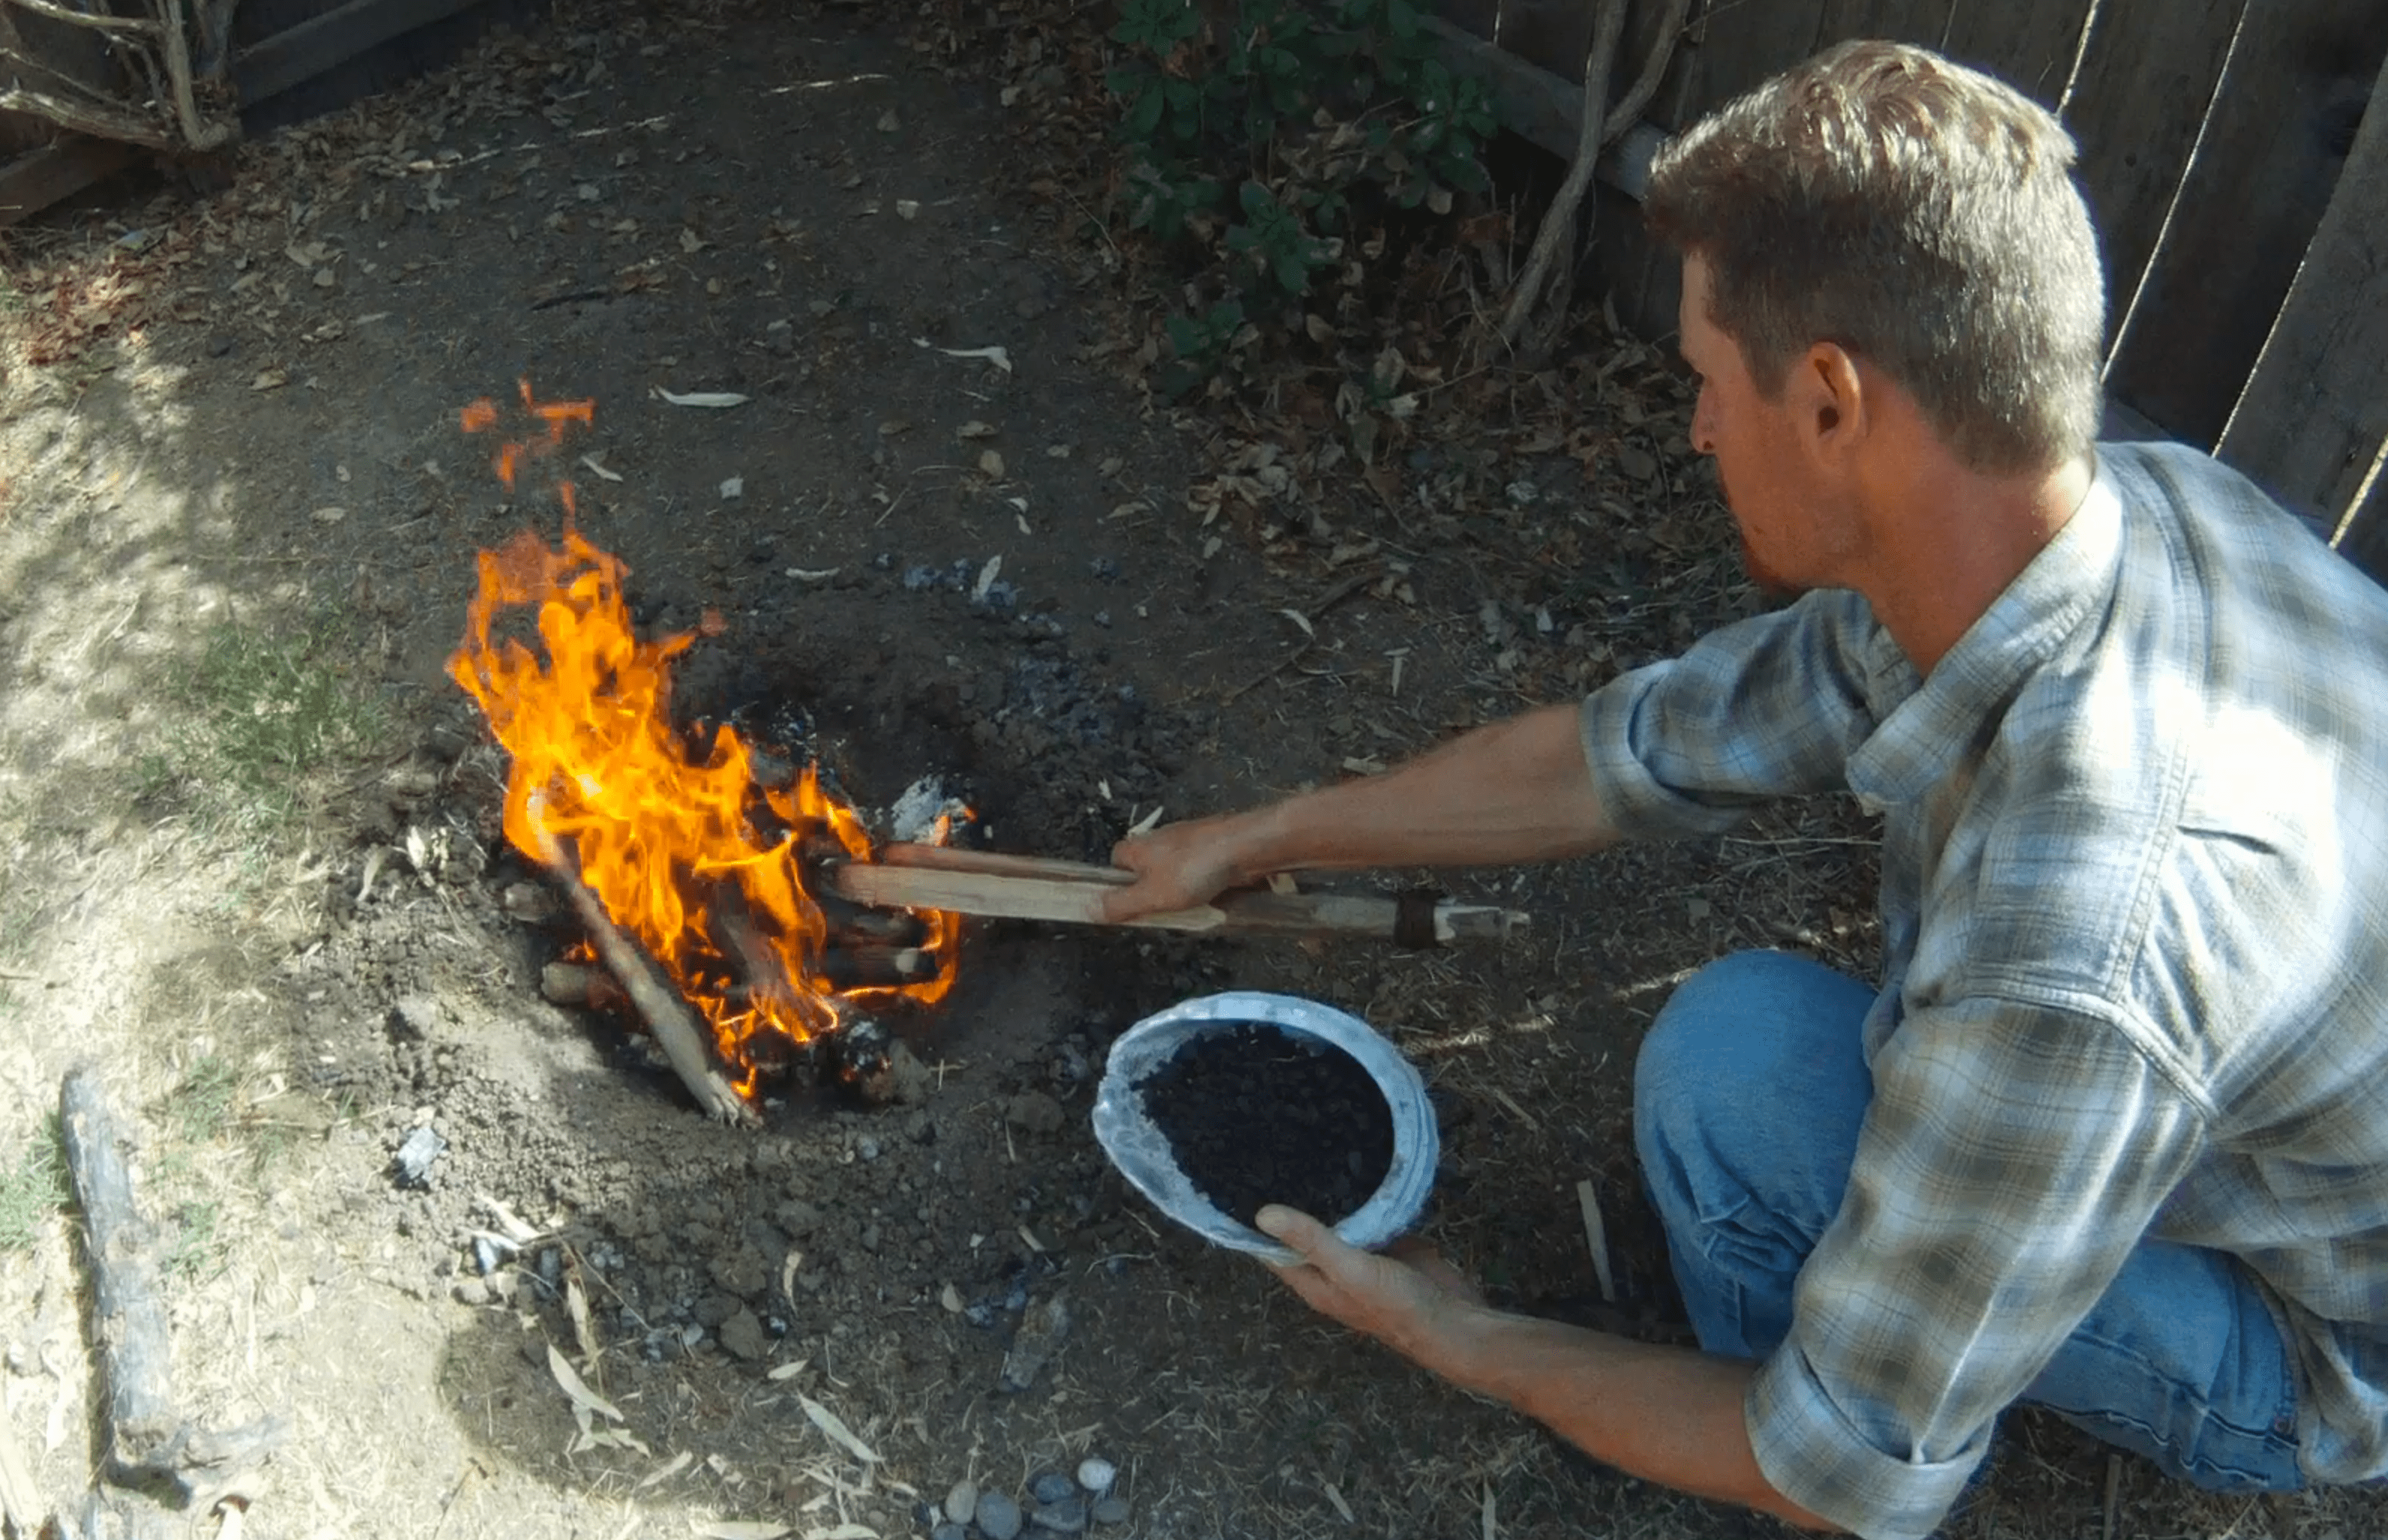 Ancient Manufacturing Technique Exposed Native Californians To Dangerous Toxins